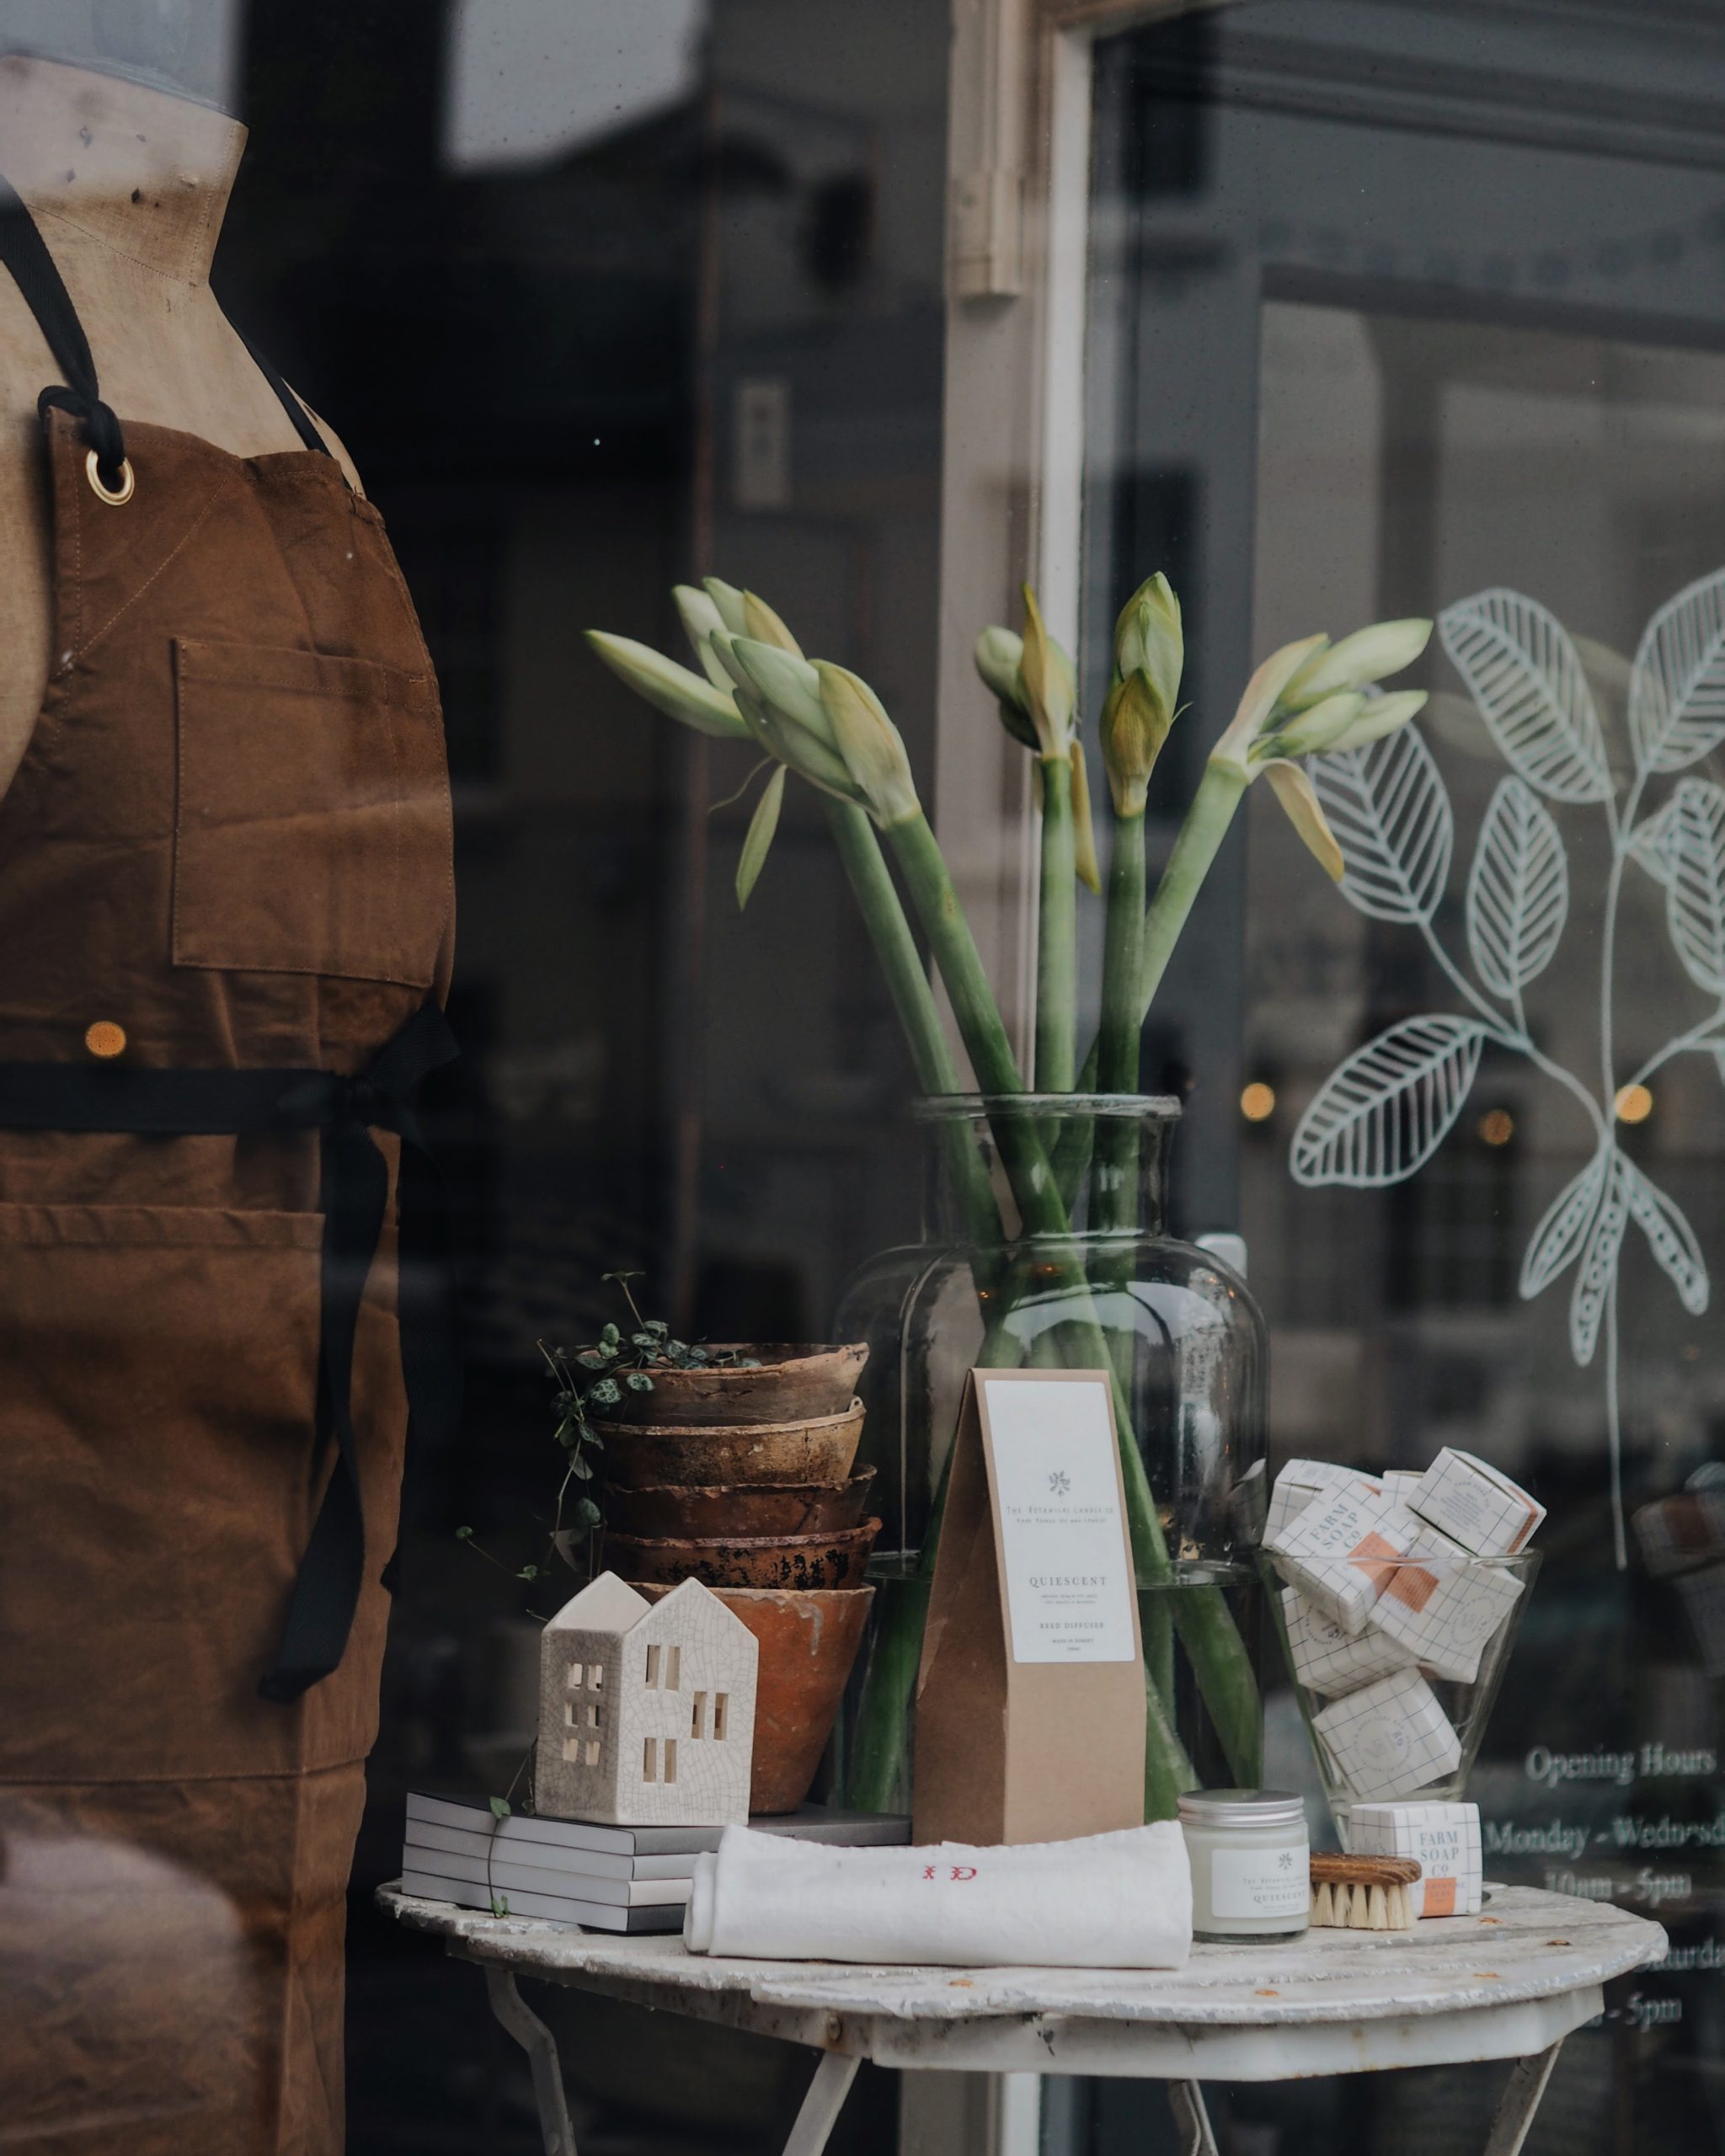 Window display with British made products of The Botanical Candle Co. in Shaftesbury, Dorset